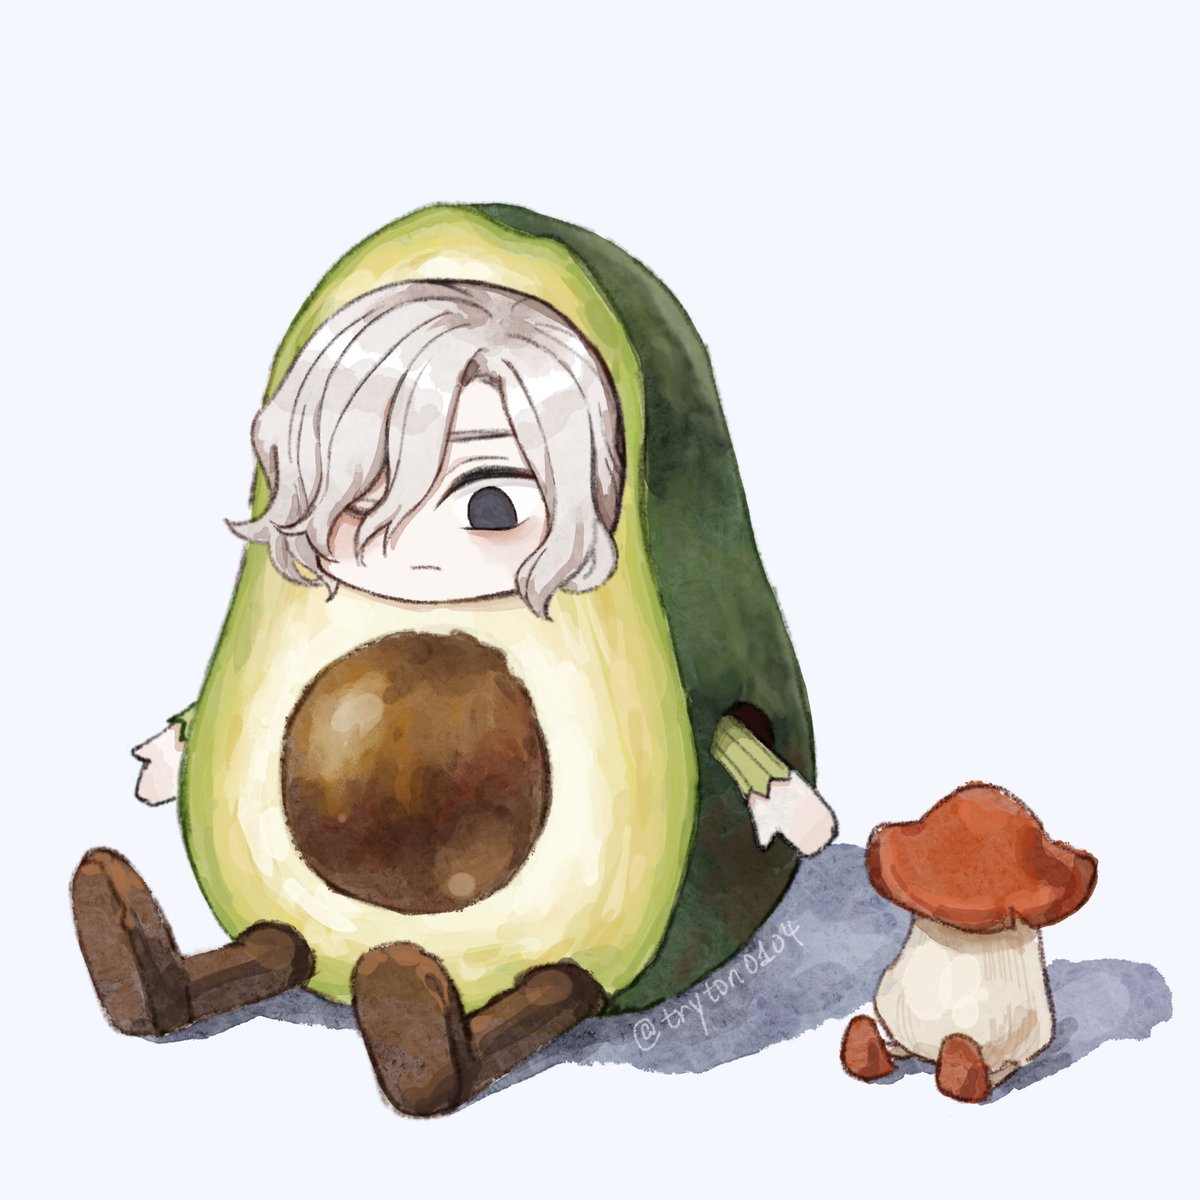 Oh no! Captain Mithrun accidentally stepped into the changeling and transformed into an AVOCADO !!!!!!!🥑🥑🥑
#Mithrun
#ミスルン